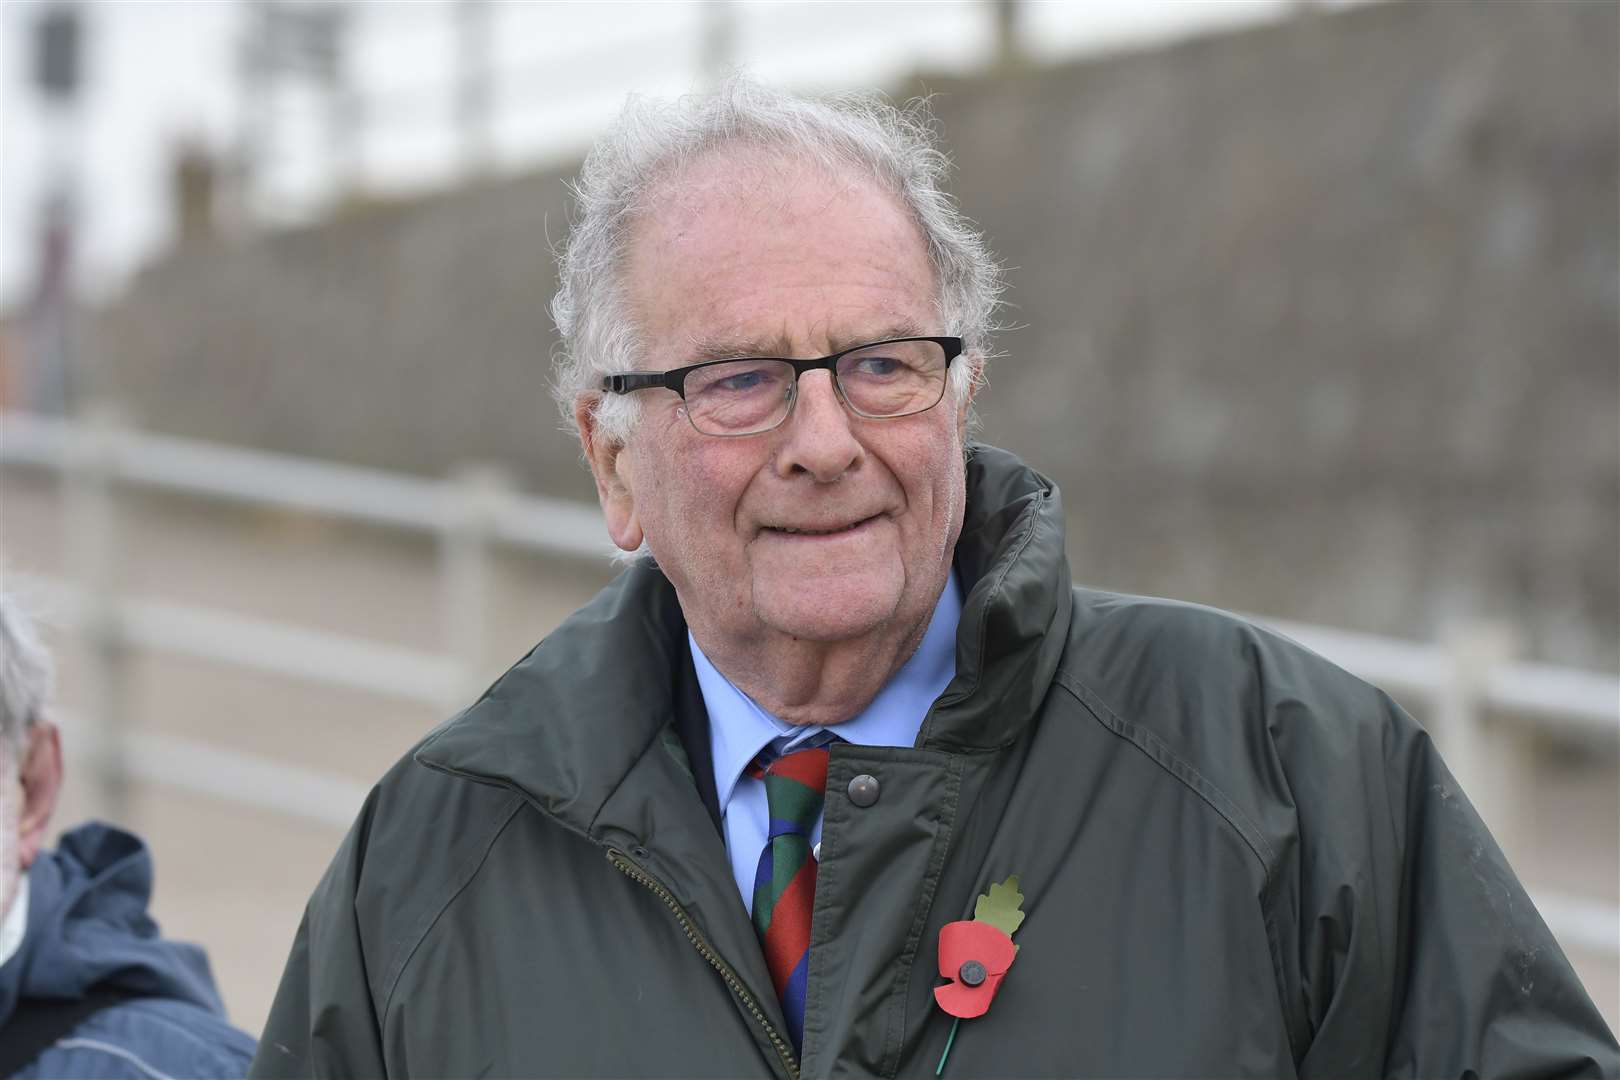 Sir Roger Gale has rejected claims he has spoken out against the project behind closed doors. Picture: Tony Flashman